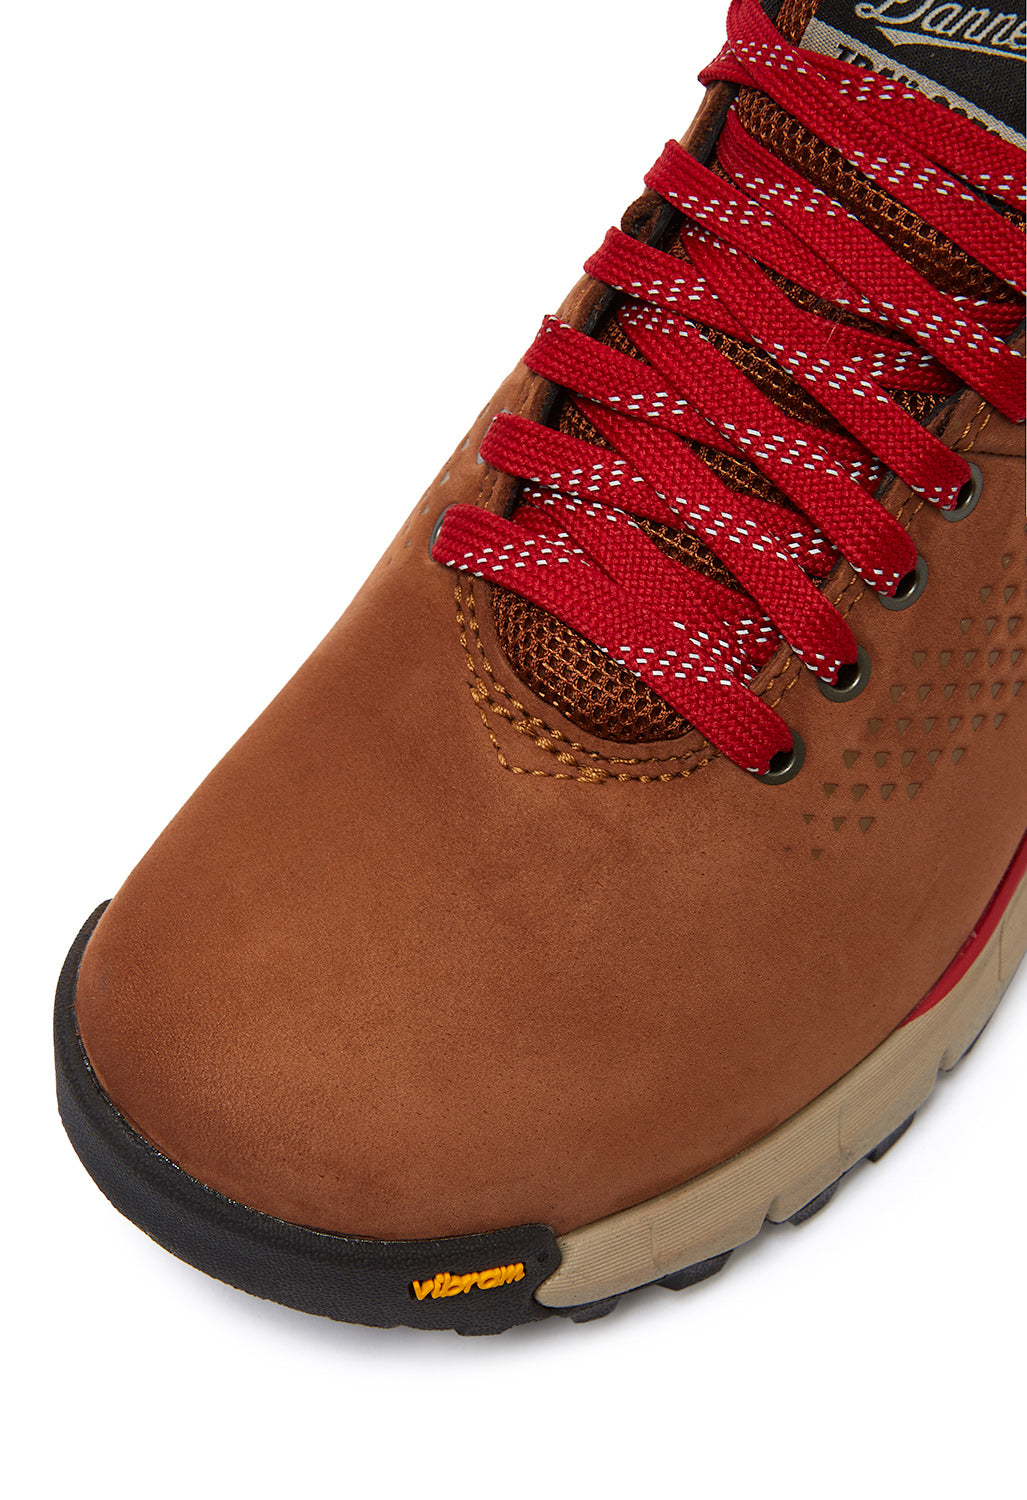 Danner Trail 2650 Mid GORE-TEX Women's Boots - Brown/Red